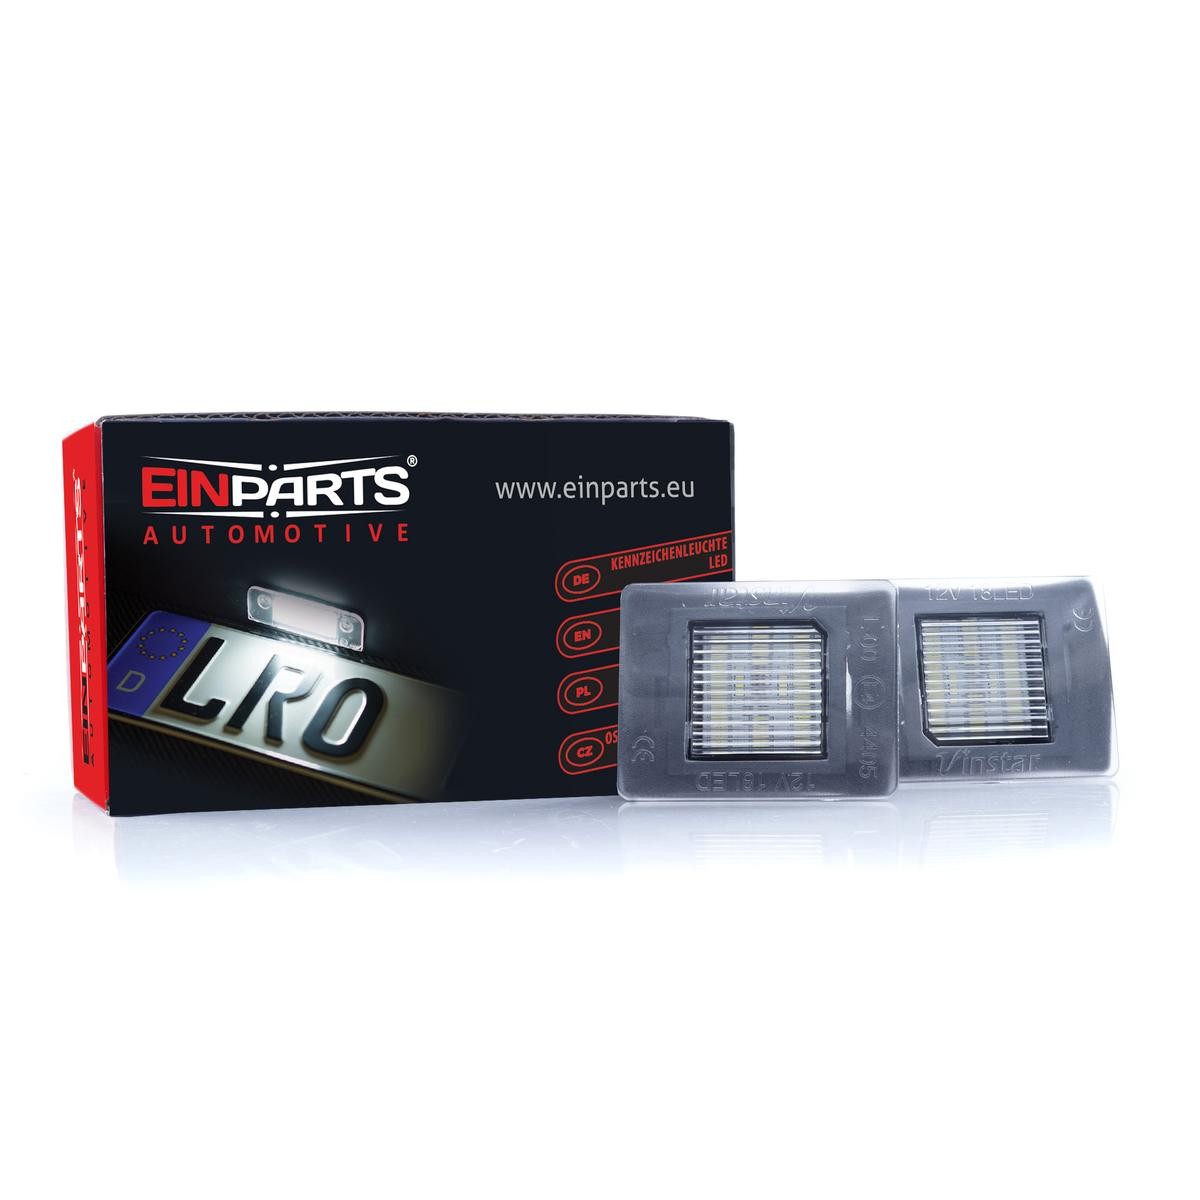 EINPARTS LED Suitable for CAN bus systems Licence Plate Light EP69 buy